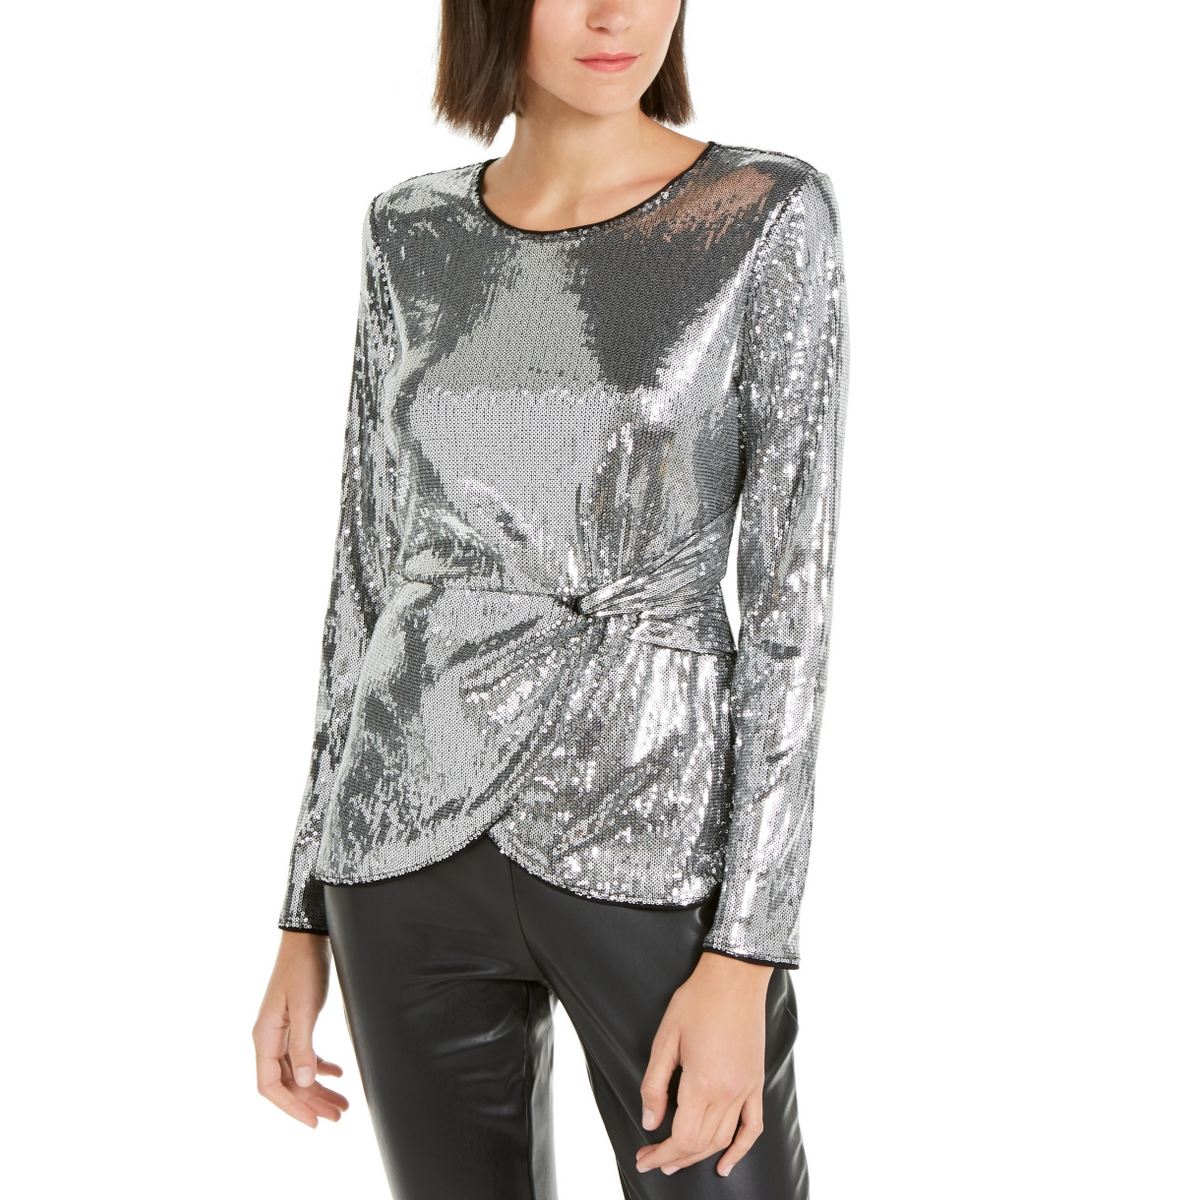 INC NEW Women/'s Twisted-front Sequined Party Blouse Shirt Top TEDO